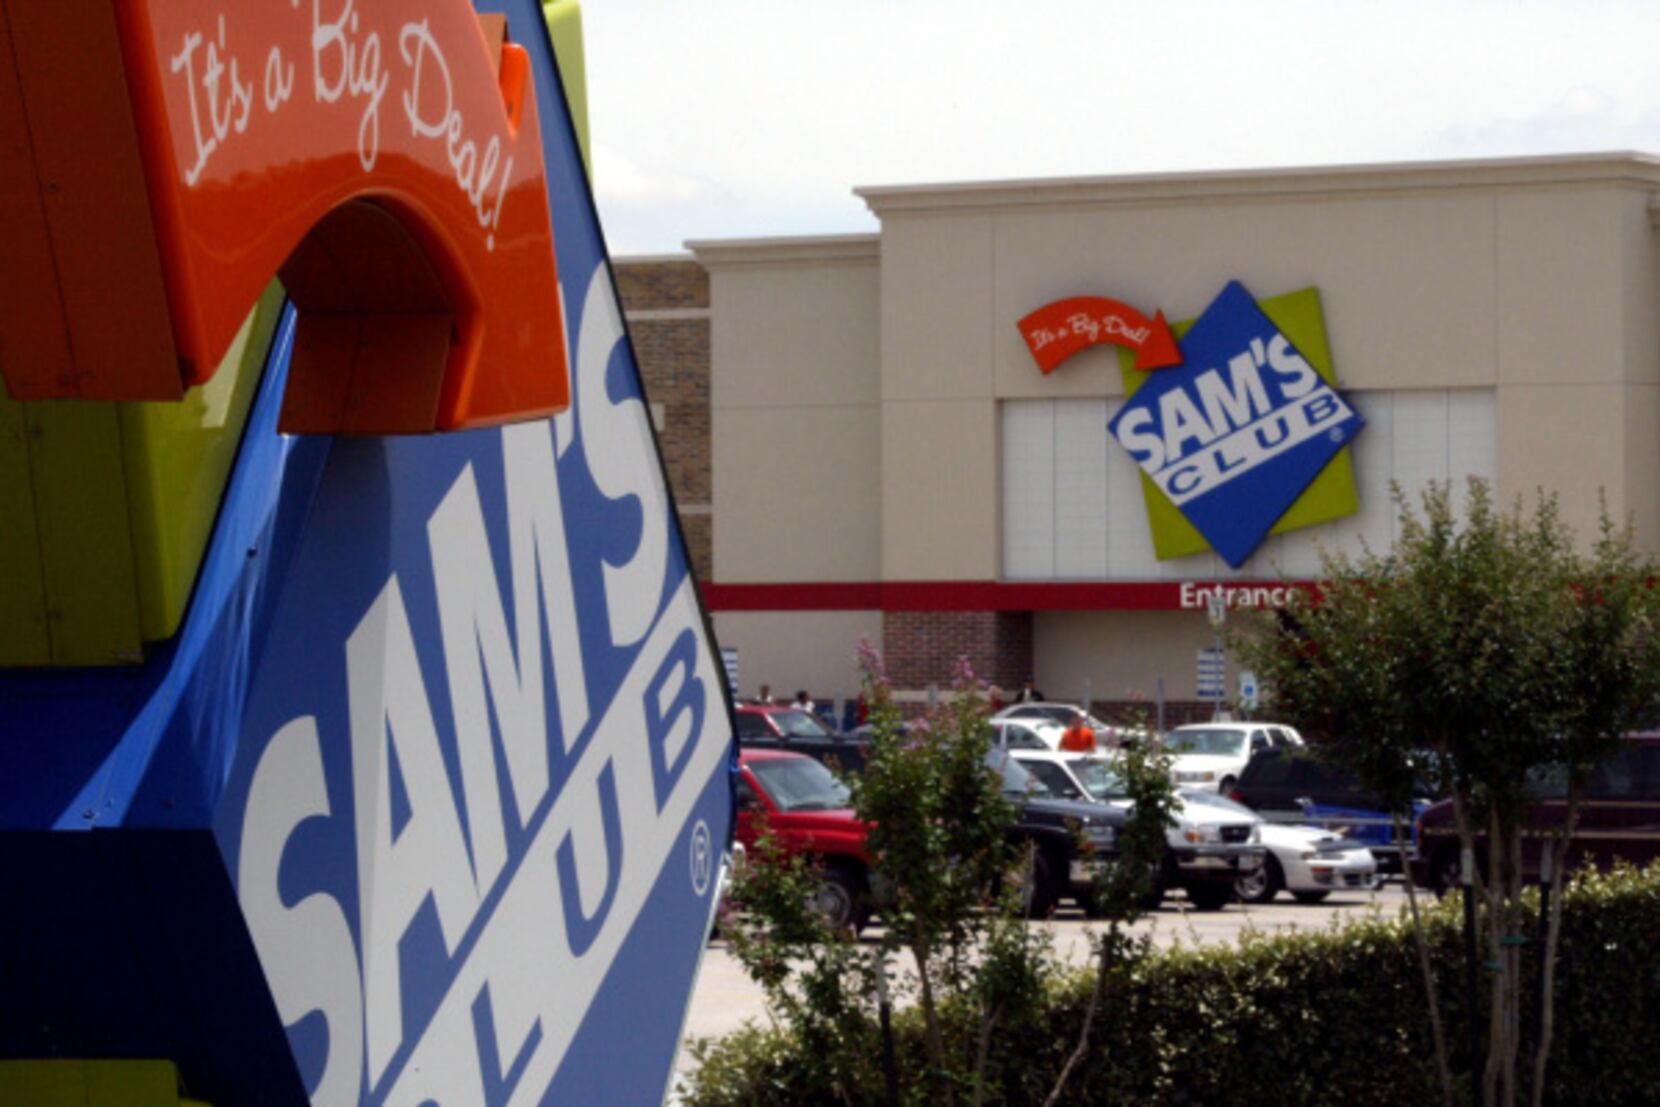 Sam's Club is testing a scan-and-ship option for shoppers